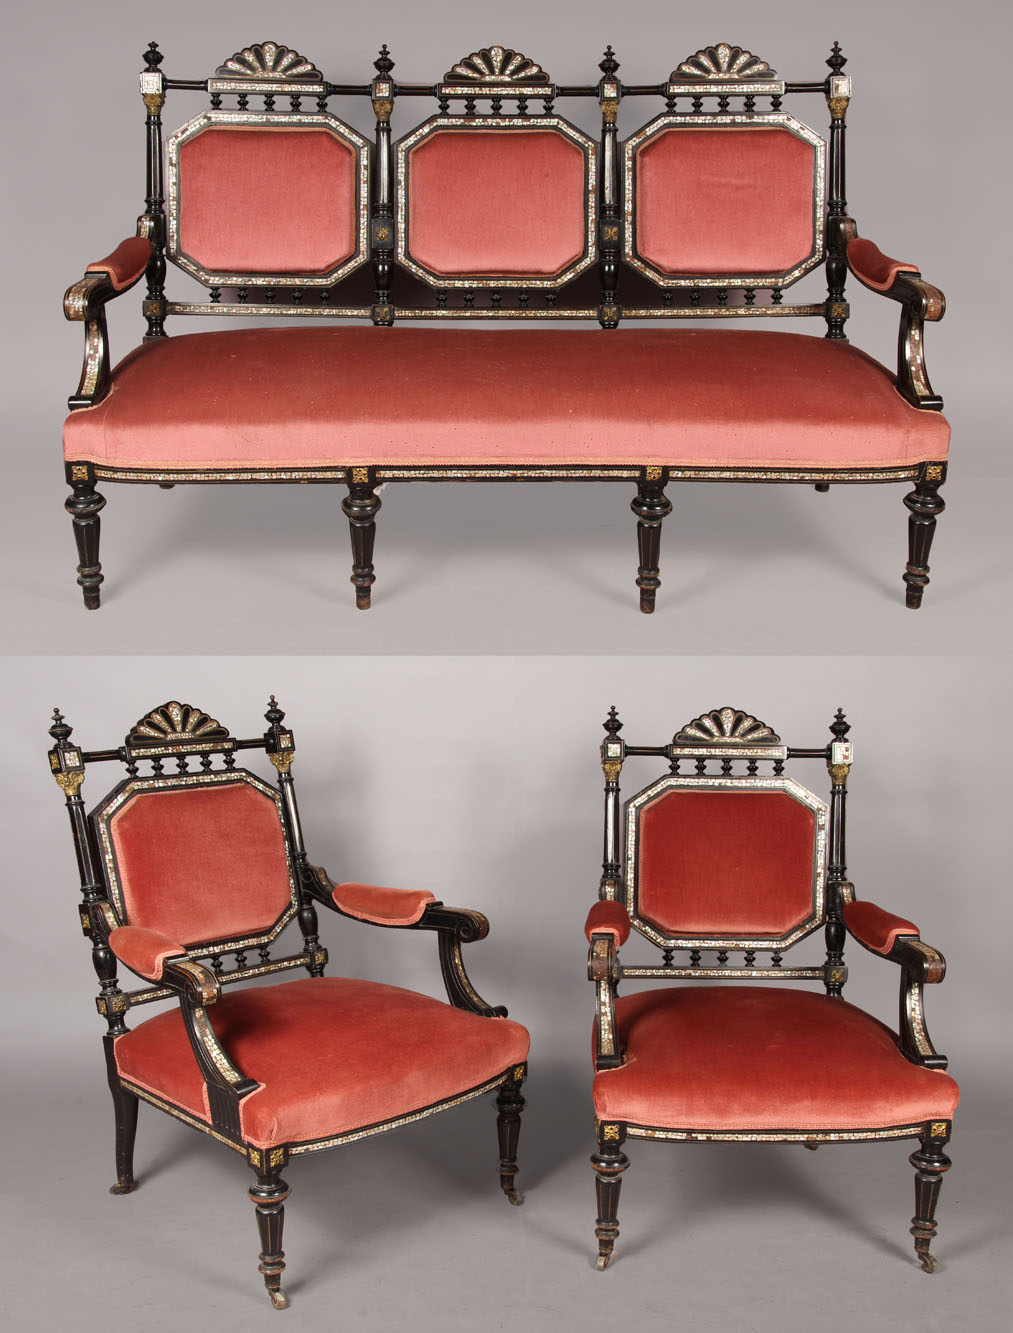  SOFA Y DOS SILLONES FRANCESES LOUIS PHILIPPE. 